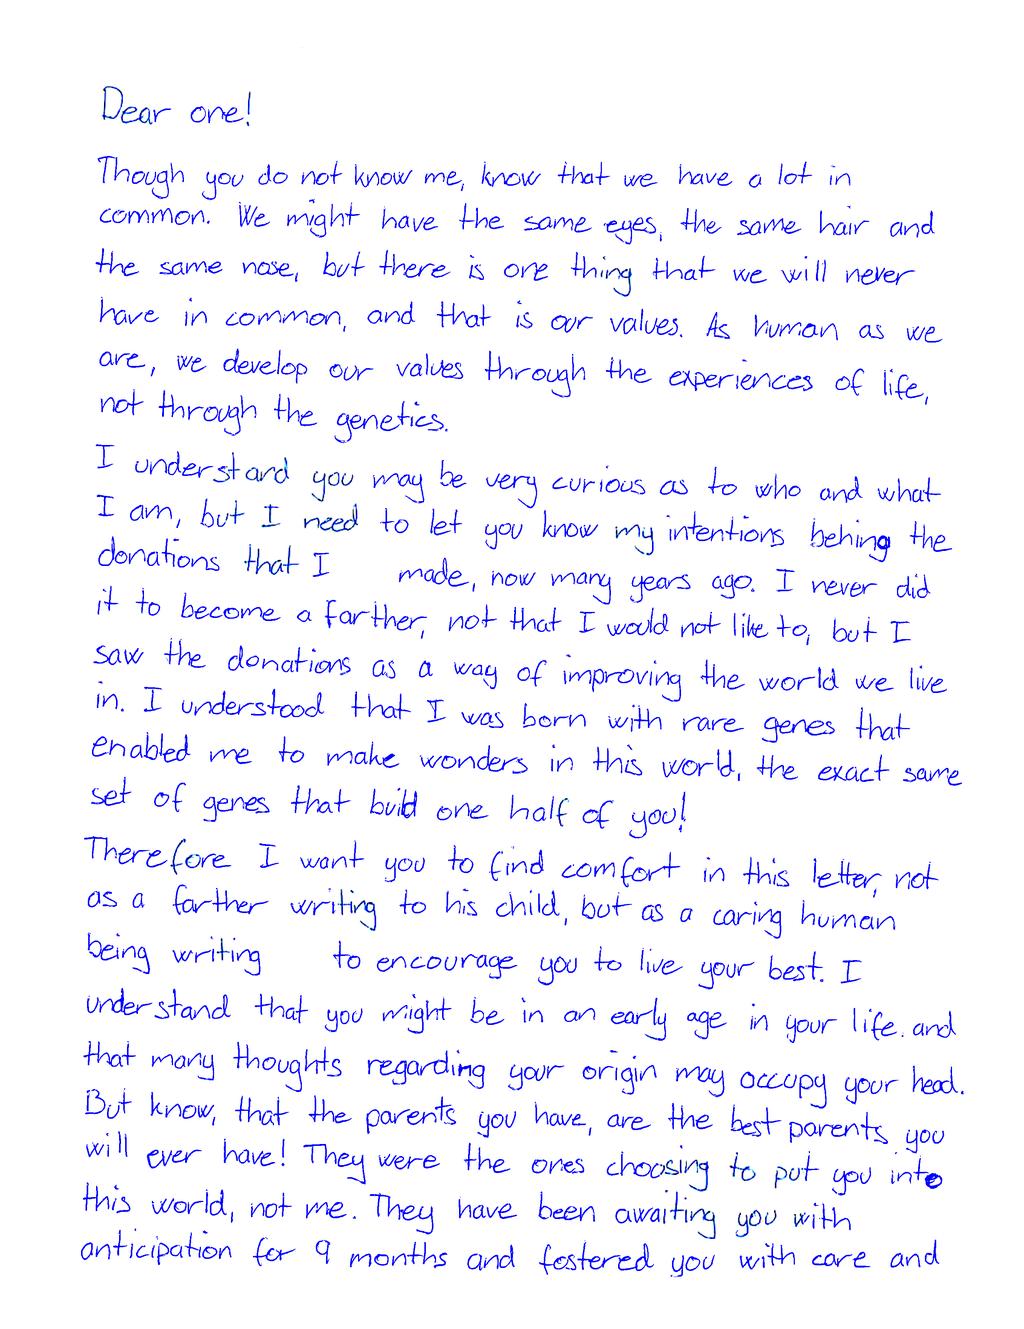 A personal message from MICHEL - page 1 of 4 My